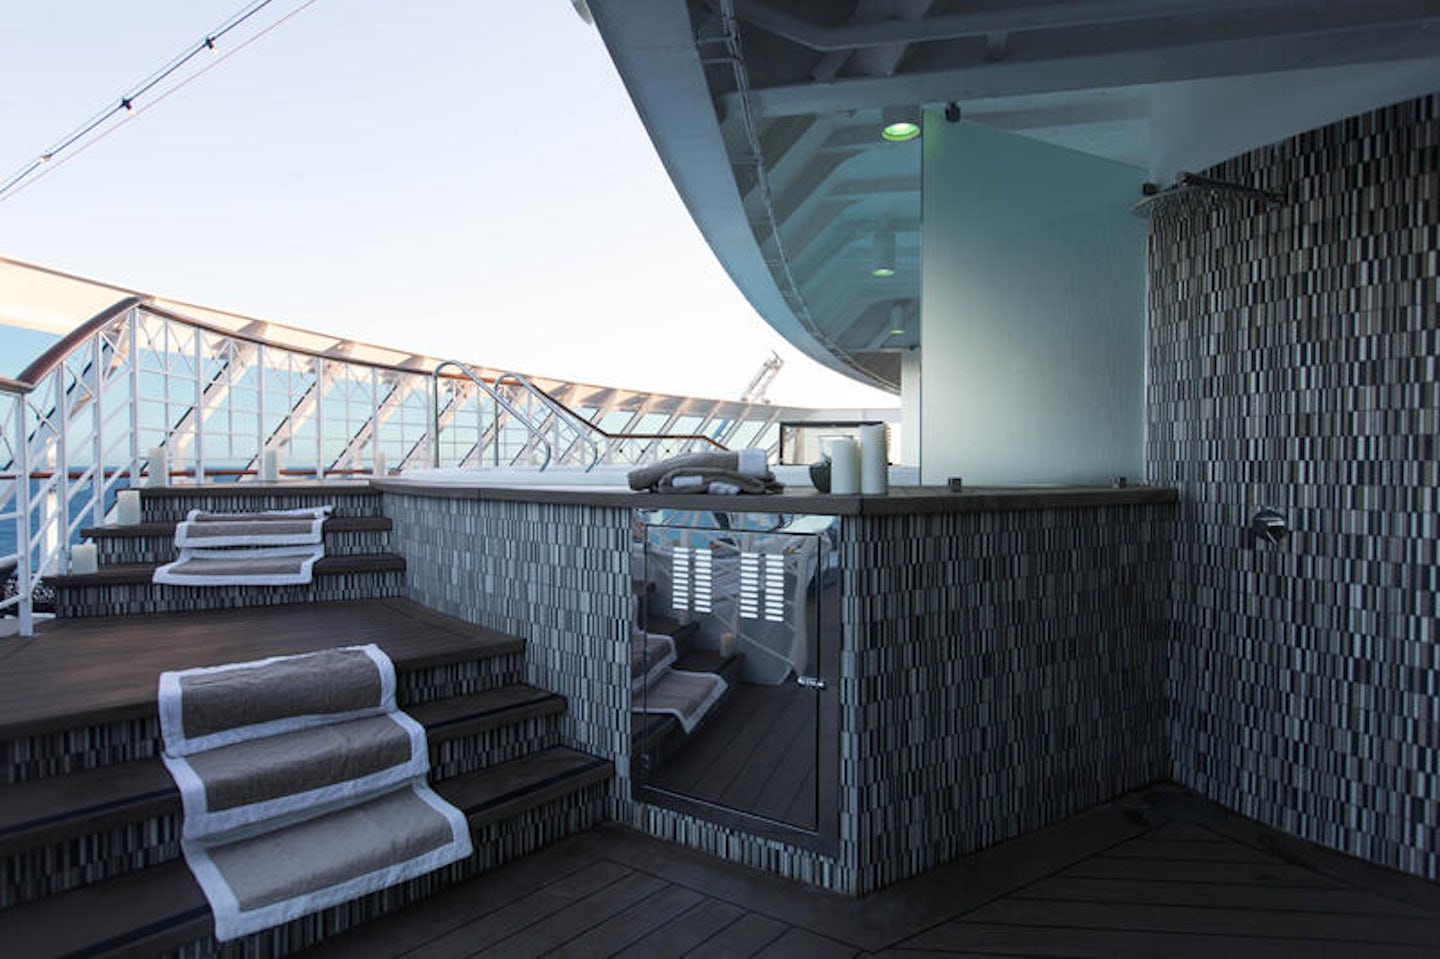 Nights in Private Places Experience on Azamara Journey